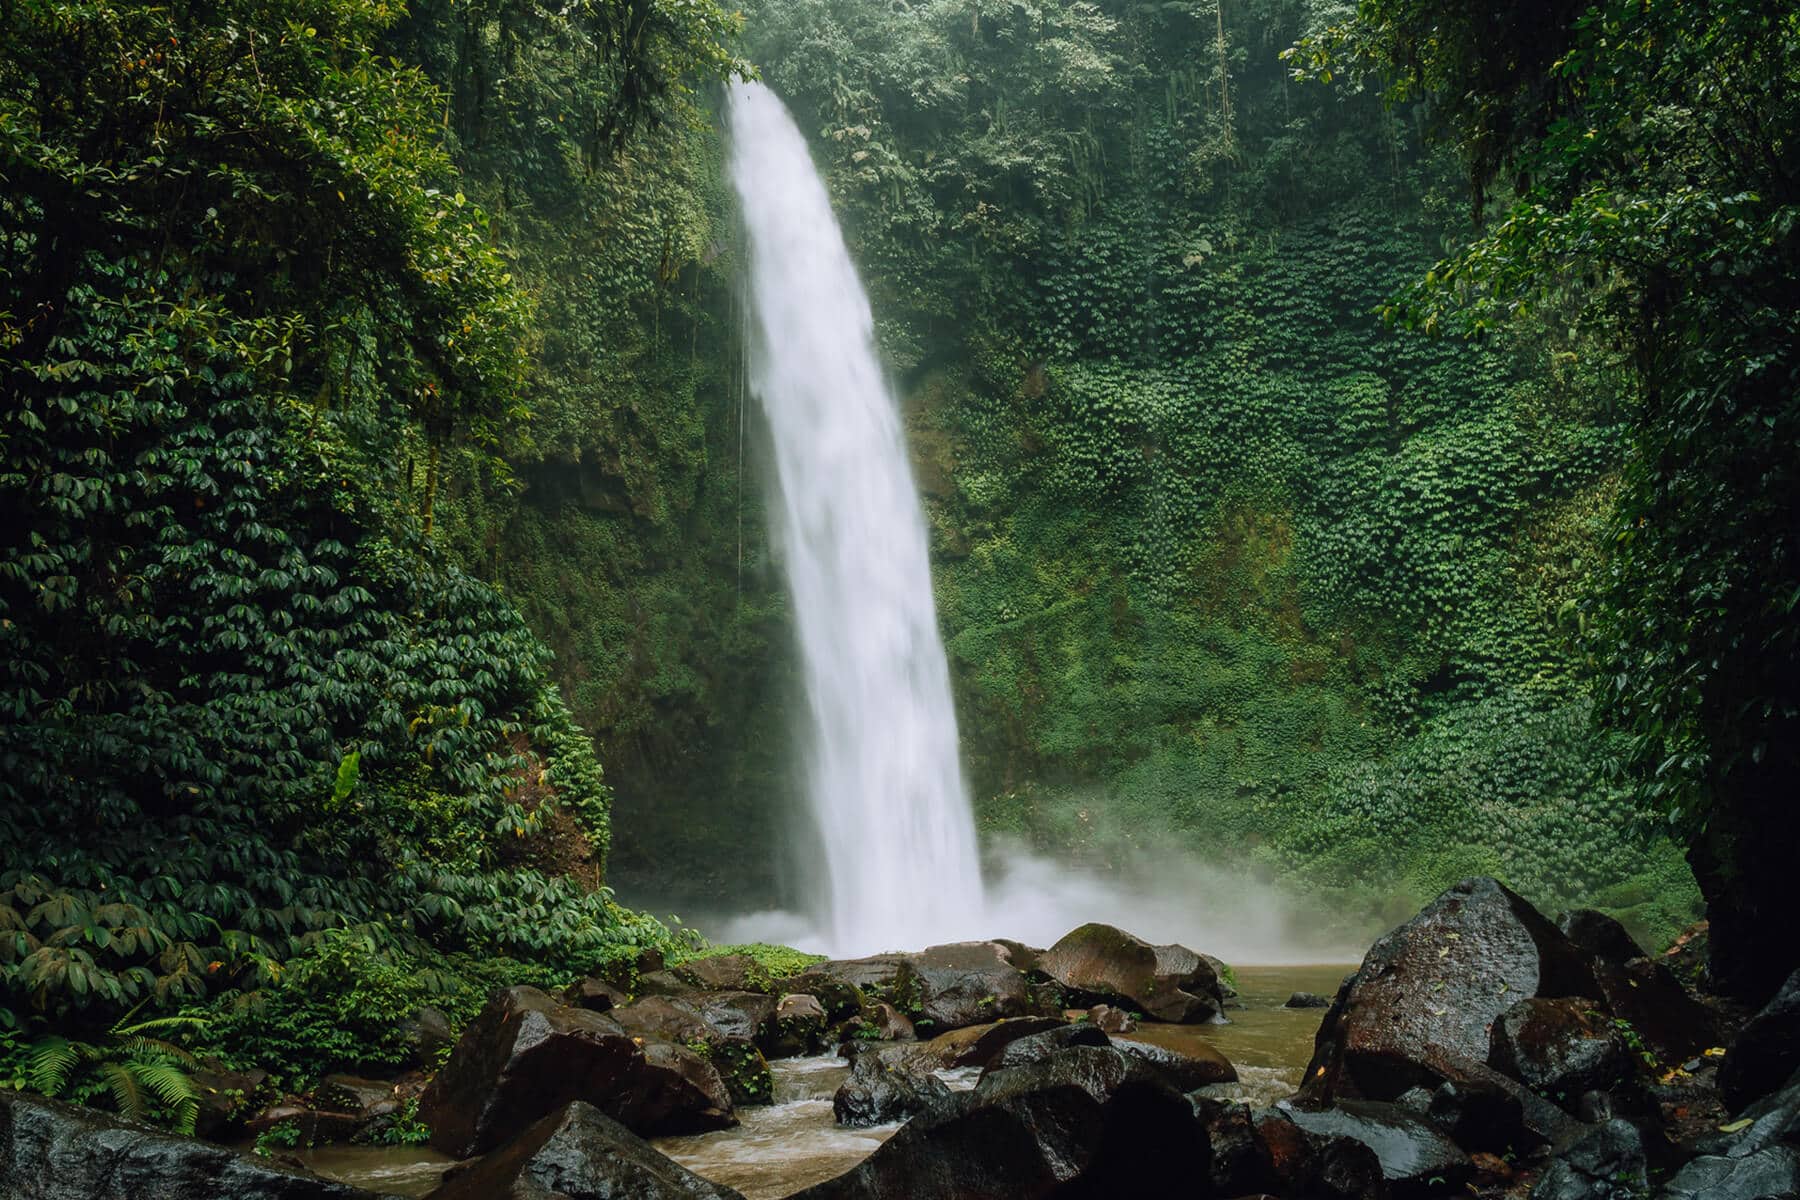 A guide to all the best waterfalls in Ubud Bali - View of the powerful Nungnung Waterfall